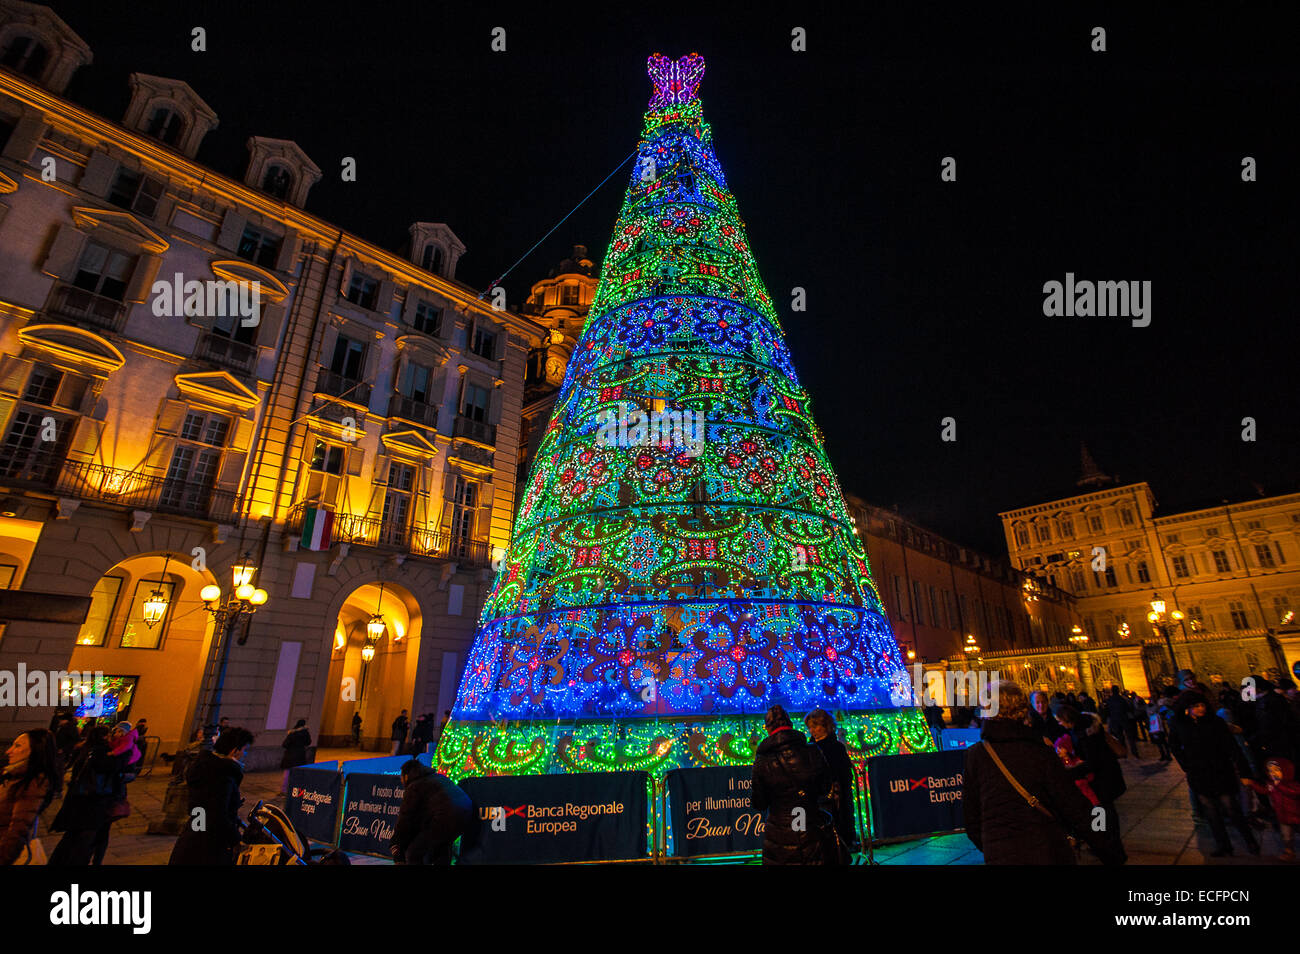 Piazza Castello in Turin, Italy. 13th December, 2014. Christmas tree in  Piazza Castello Credit: Realy Easy Star/Alamy Live News Stock Photo - Alamy